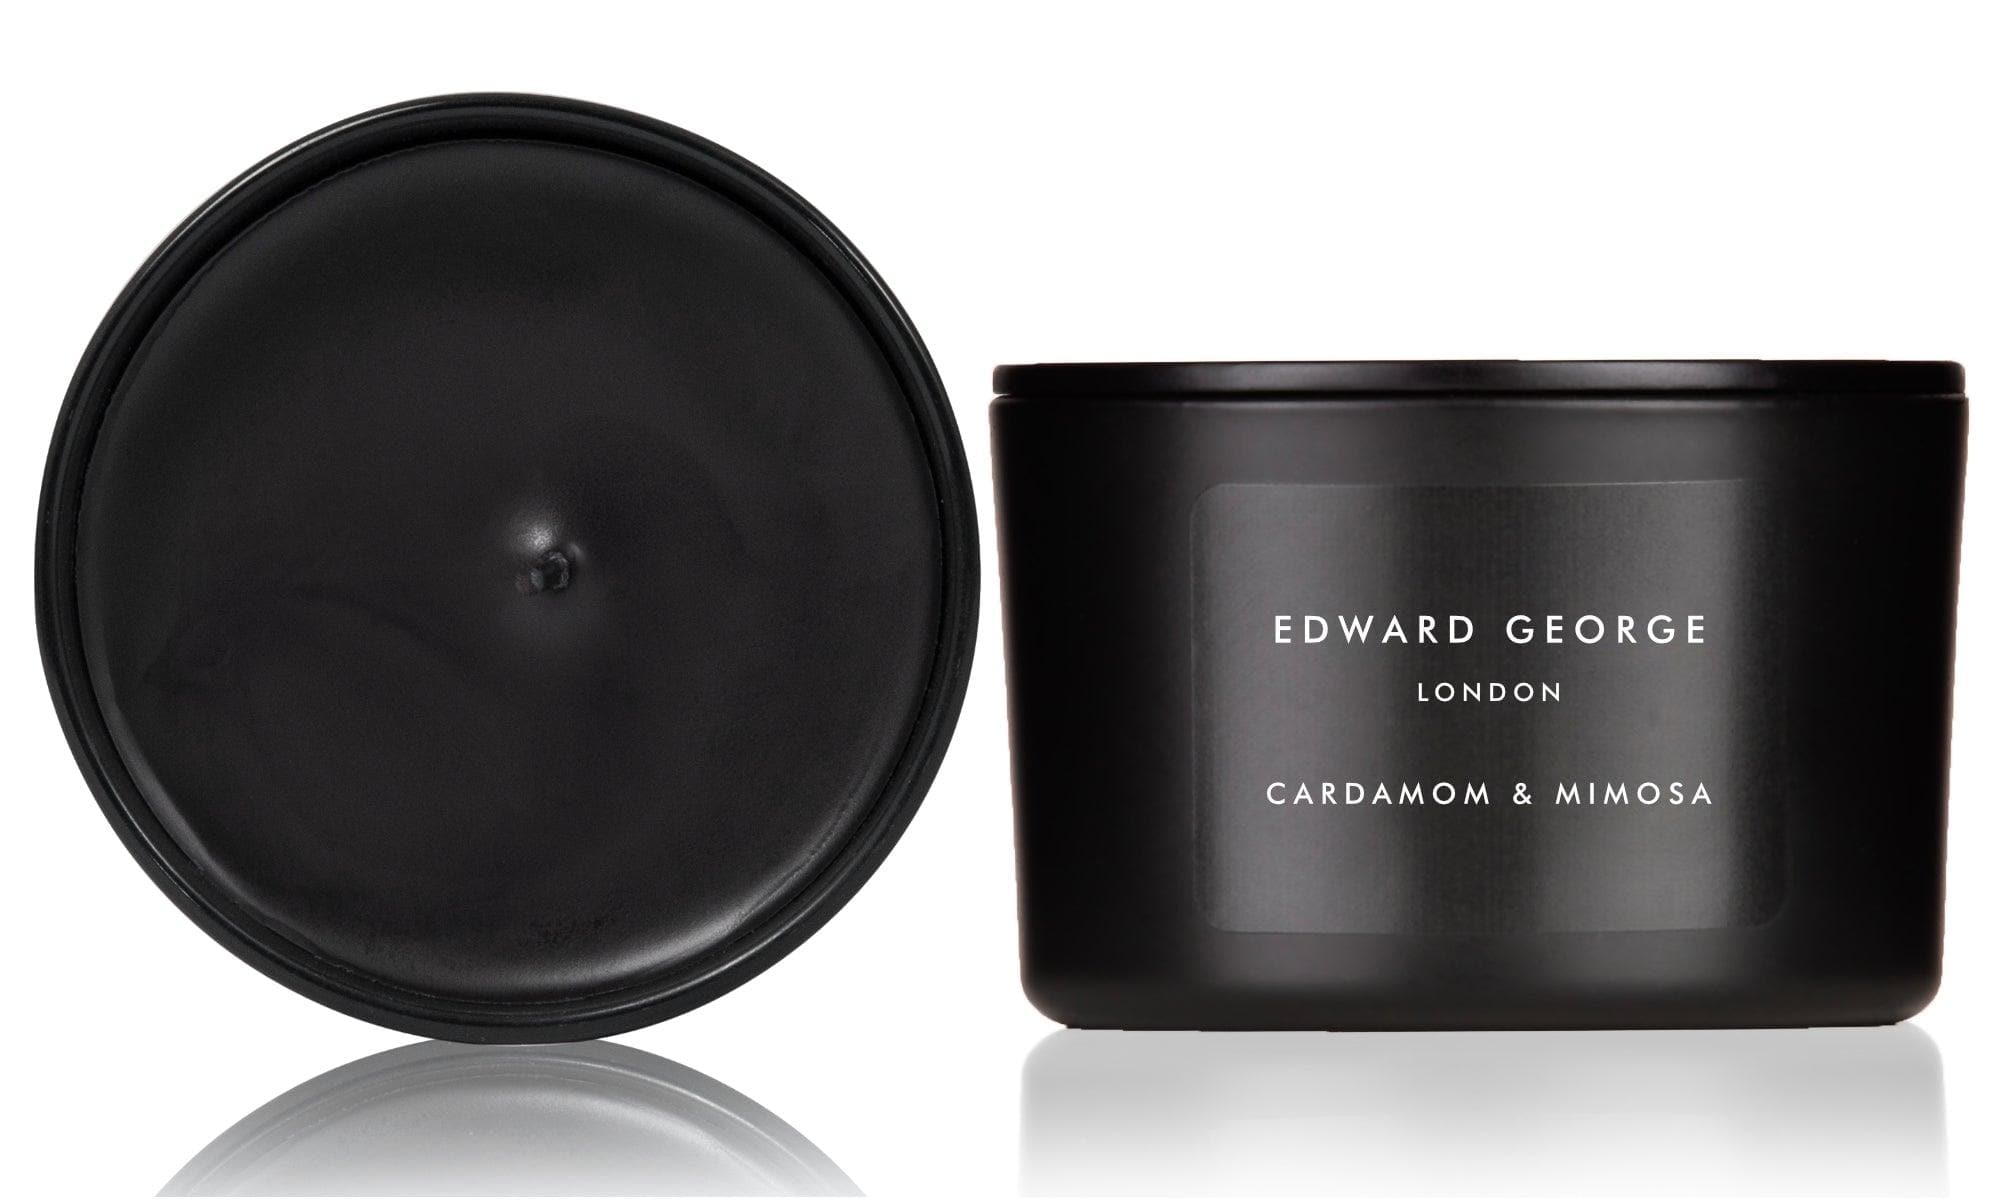 cardamom-mimosa-candles-home-fragrance-decor-room-living-room-edward-george-london-luxury-gift-ritual-scent-set-lid-zinc-alloy-black-wax-best-black-scented-candle-women-men-small